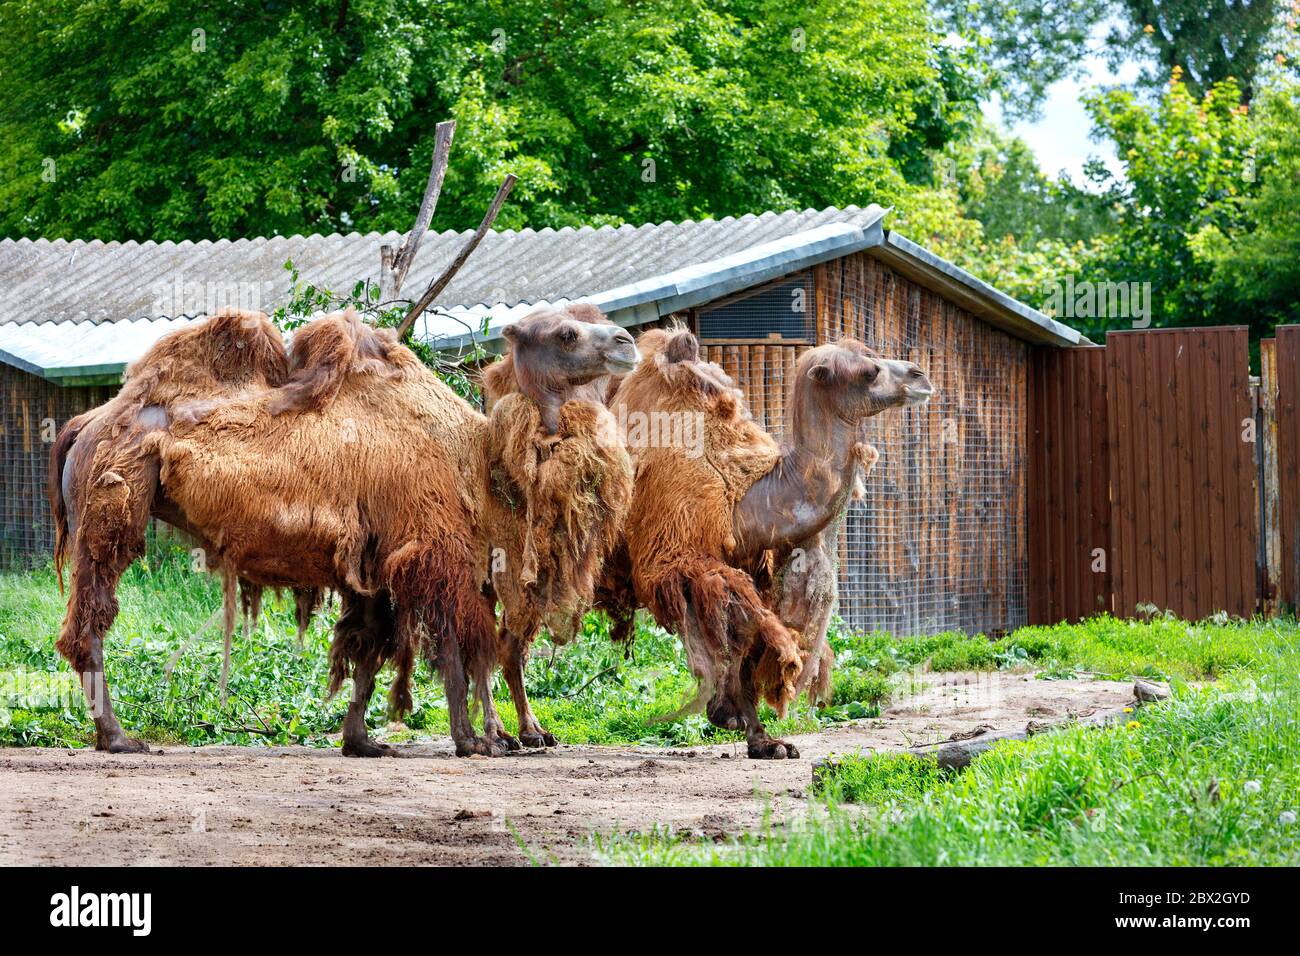 A pair of brown two-humped camels with a molting coat stand at the wooden gate on the edge of a green forest. Stock Photo